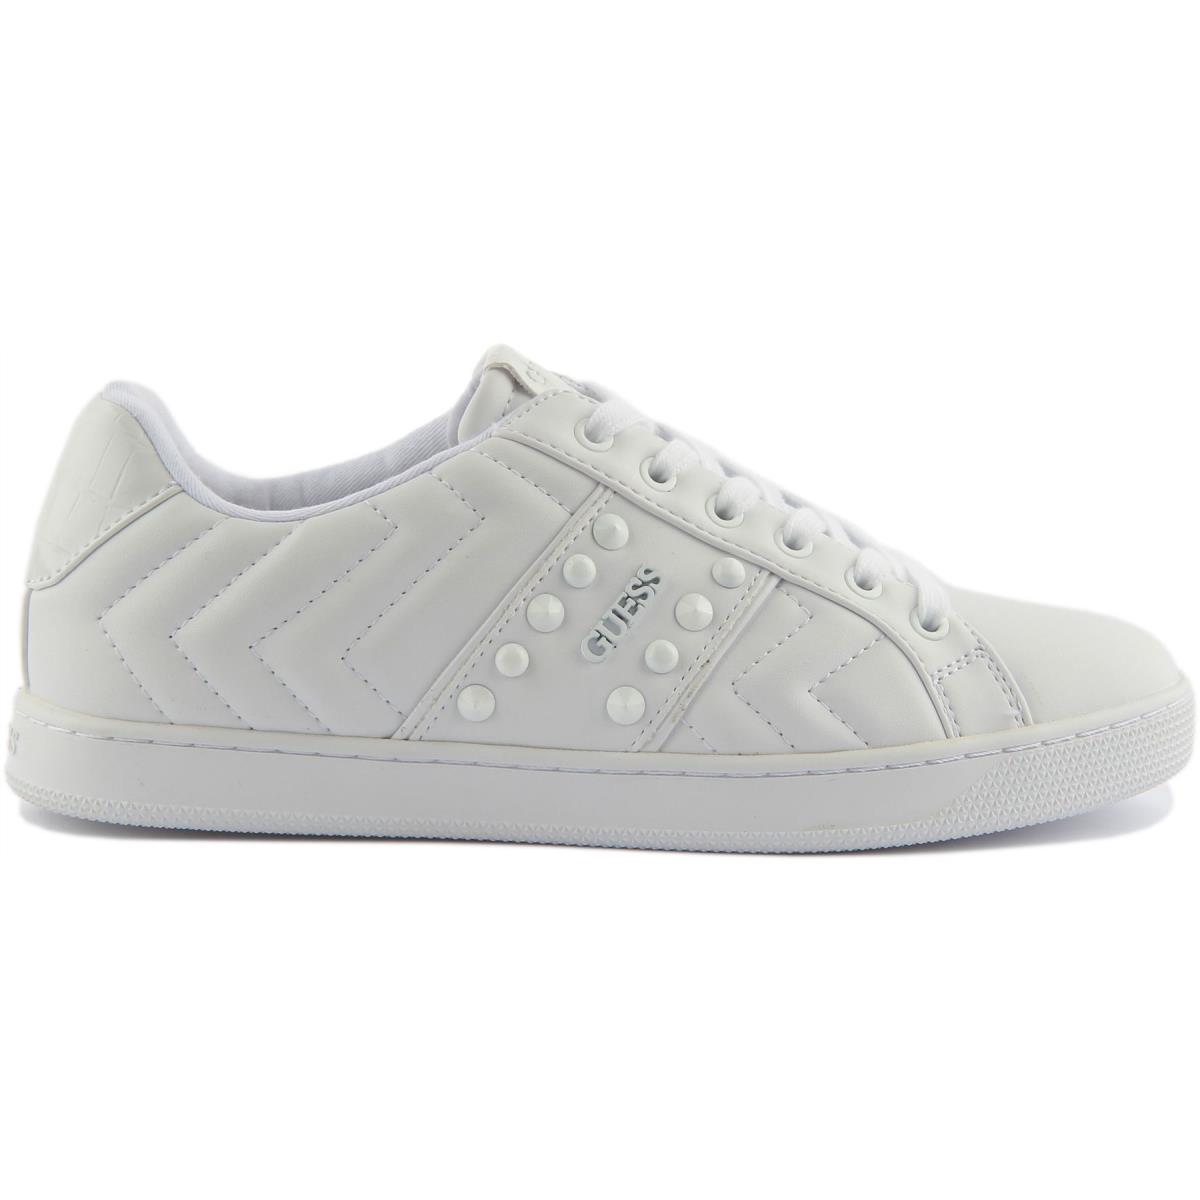 Guess Fl7Raufal12 Raula Womens Lace Up Studs Sneaker In White Size US 5 - 11